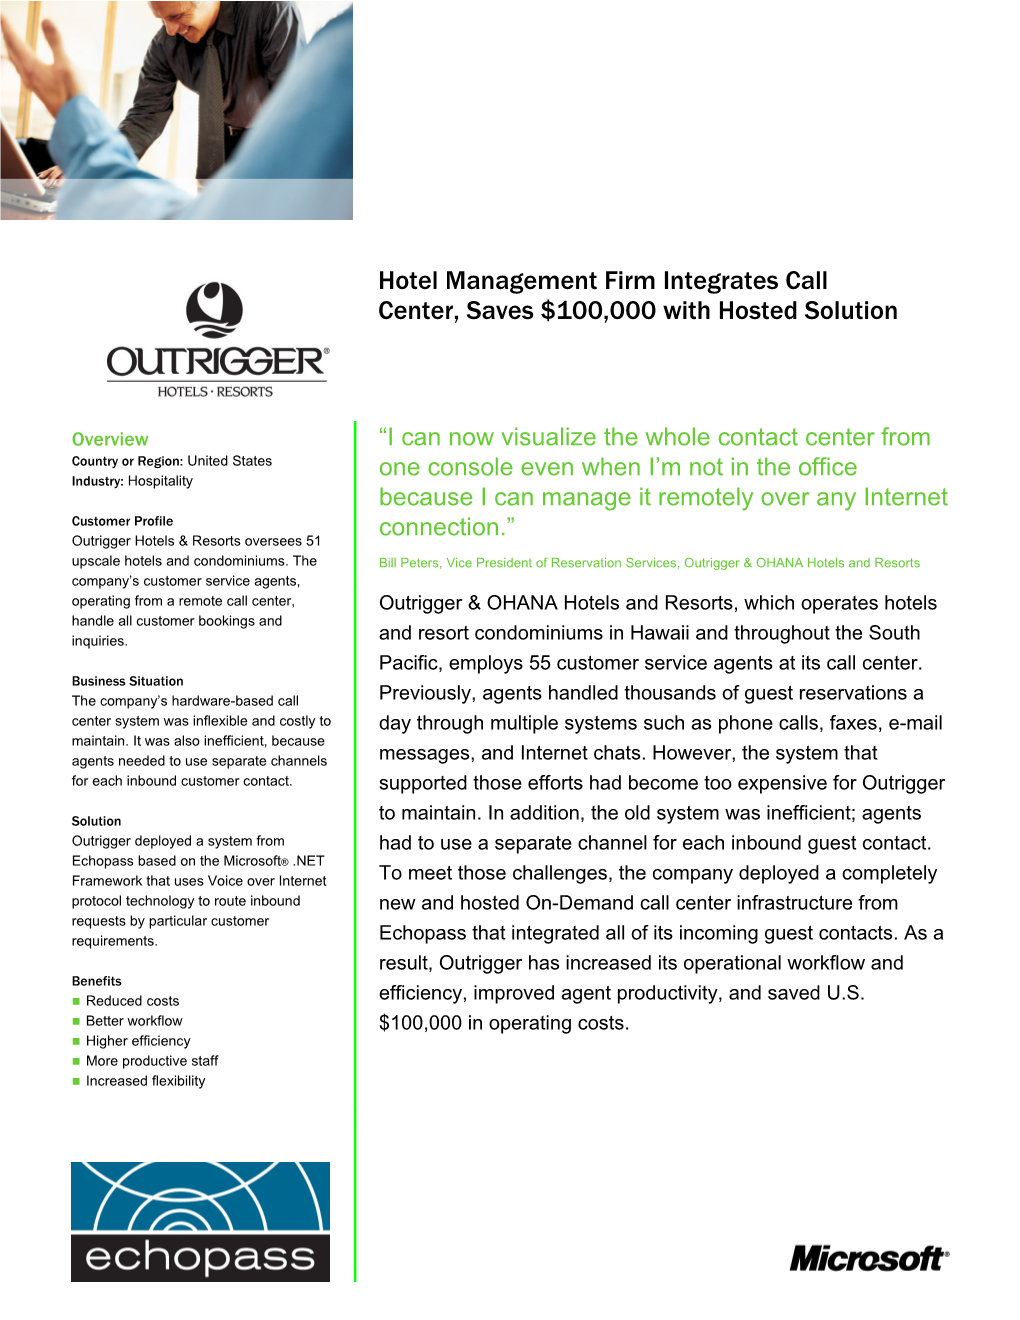 Hotel Management Firm Integrates Call Center, Saves $100,000 with Hosted Solution